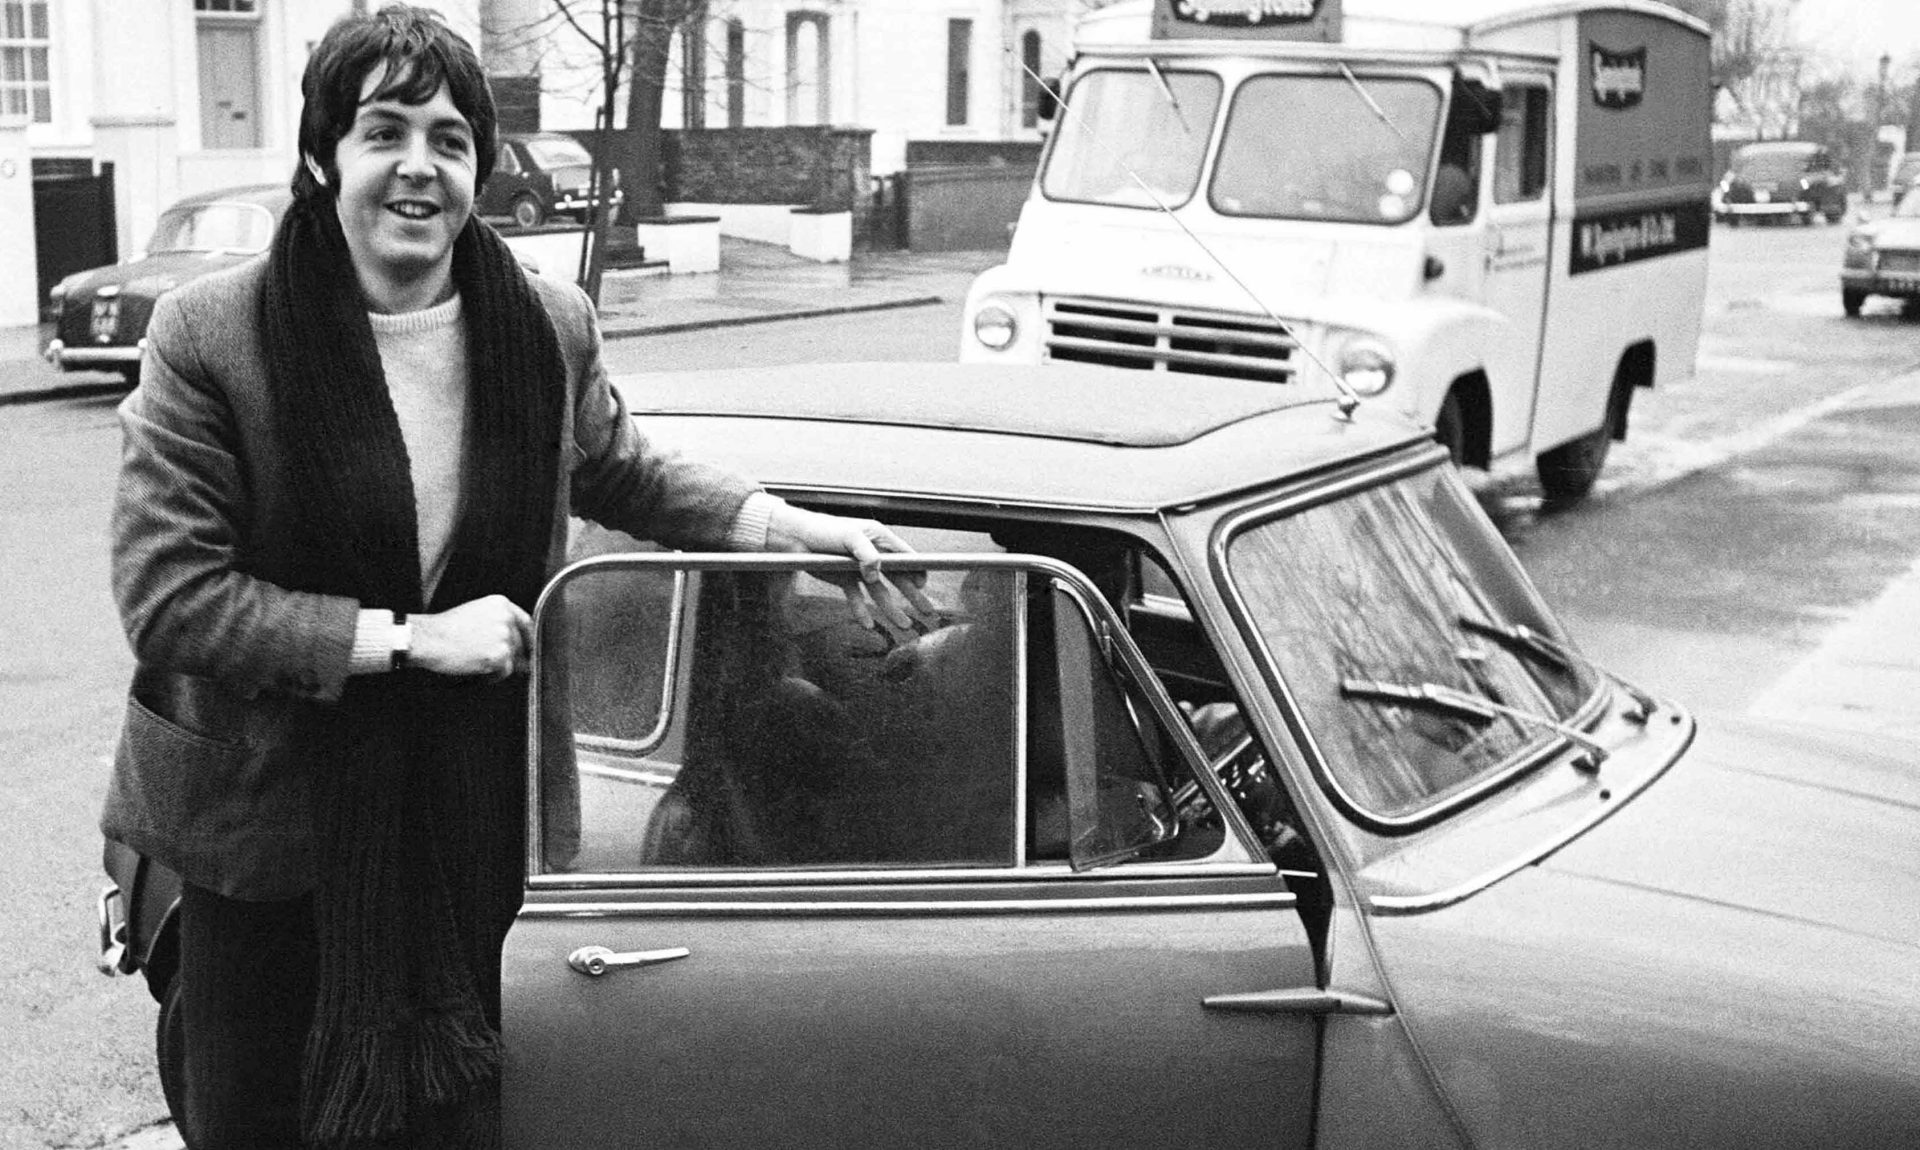 Paul McCartney of the Beatles with his mini car 27th December 1967 (Photo by Wilson/Mirrorpix/Mirrorpix via Getty Images)